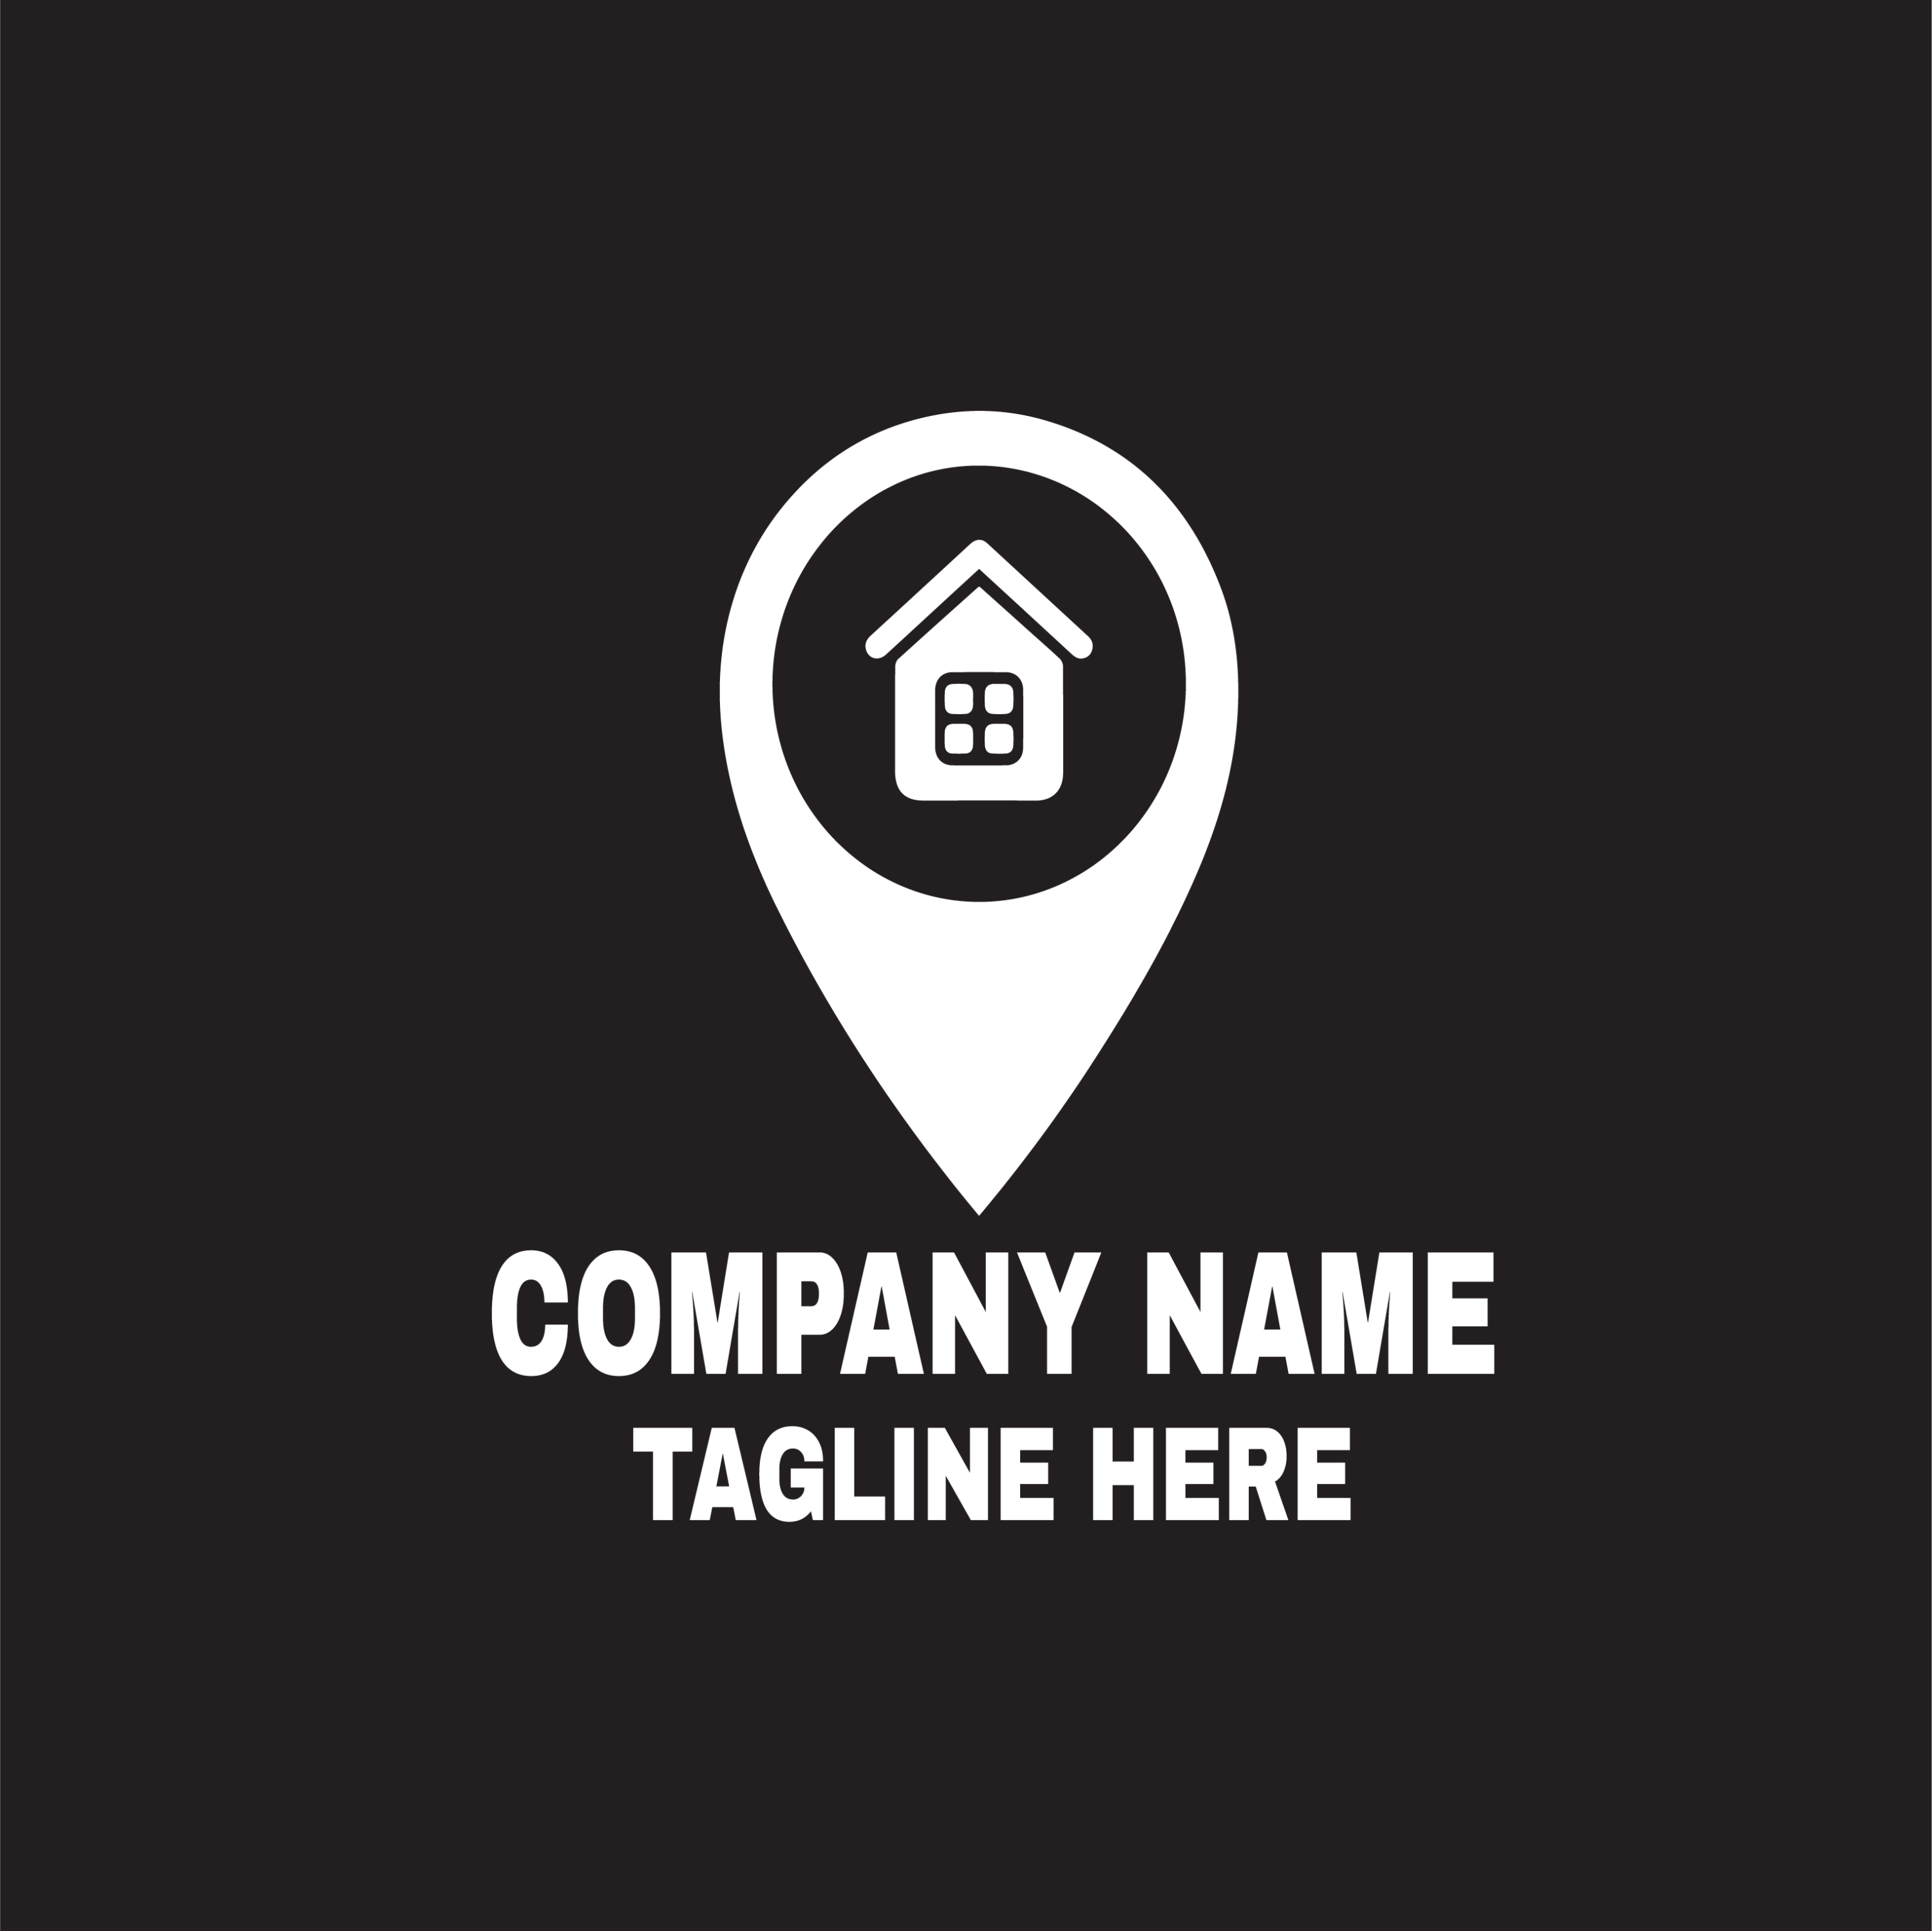 Cool Real Estate & Home Logo Template, white logo on black background.